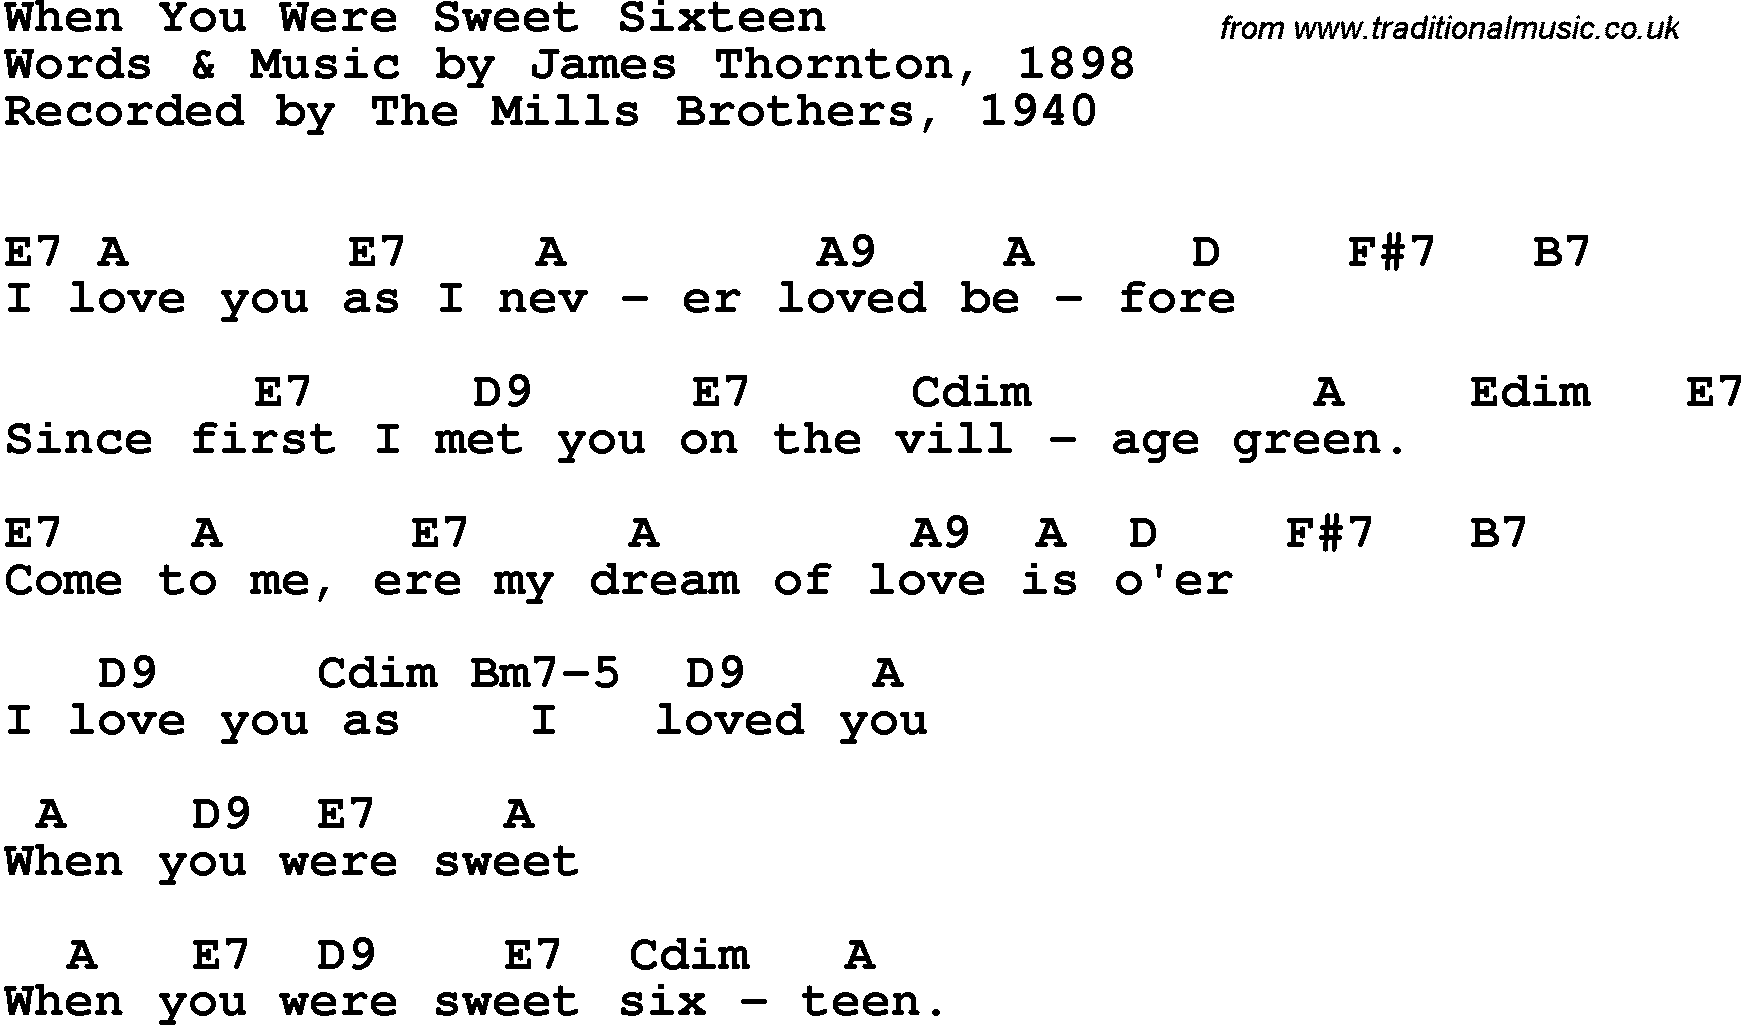 Song Lyrics with guitar chords for When You Were Sweet Sixteen - Mills Brothers - 1940